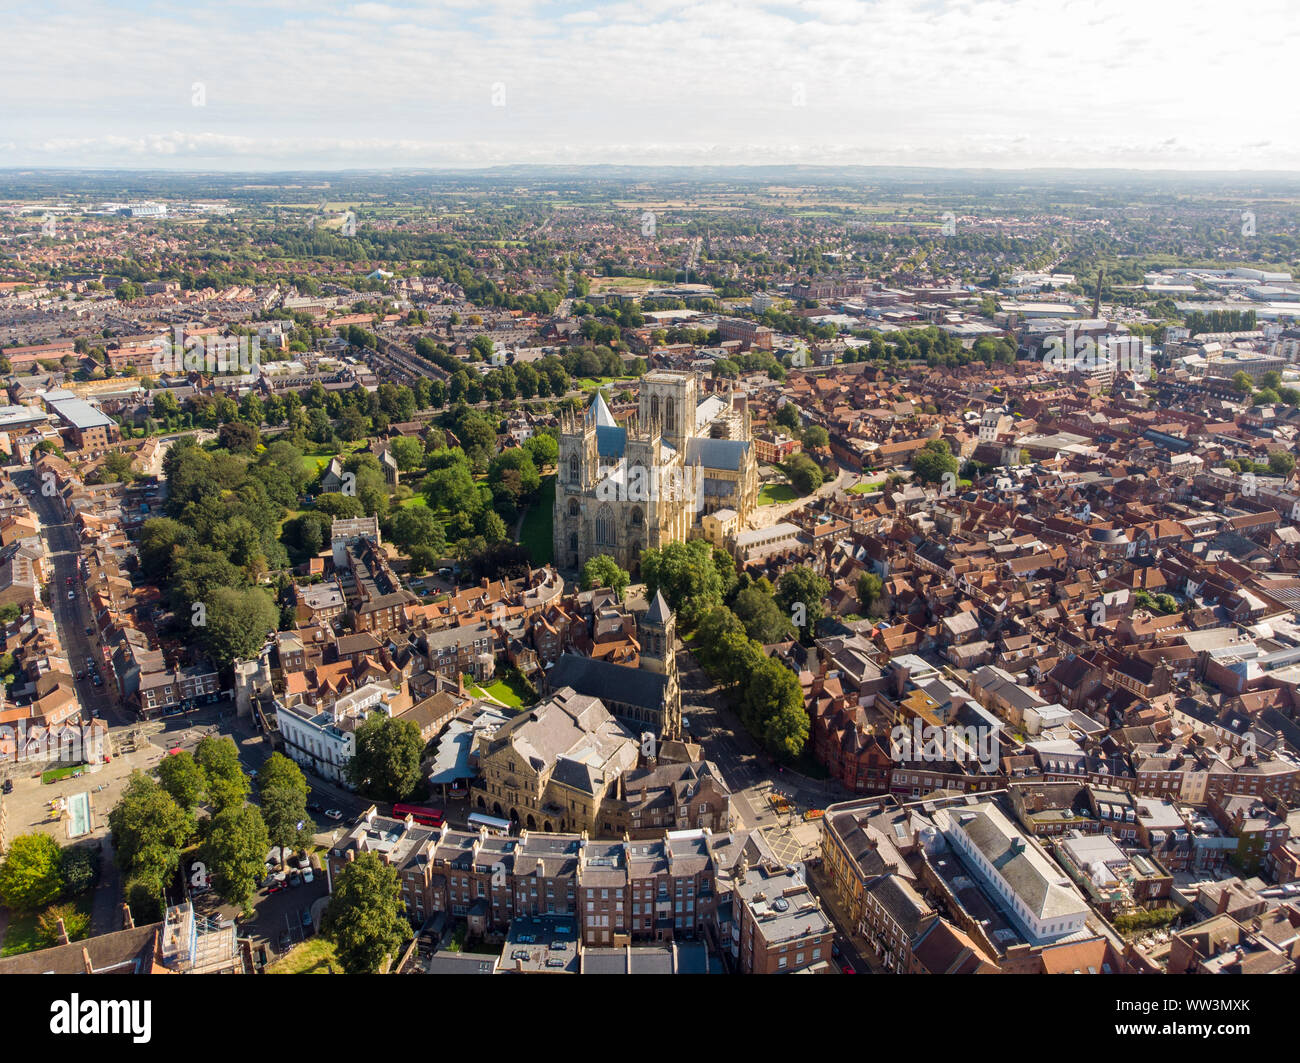 Aerial photo of the town of York located in North East England and founded by the ancient Romans, The Minster Historical Cathedral in the town centre Stock Photo